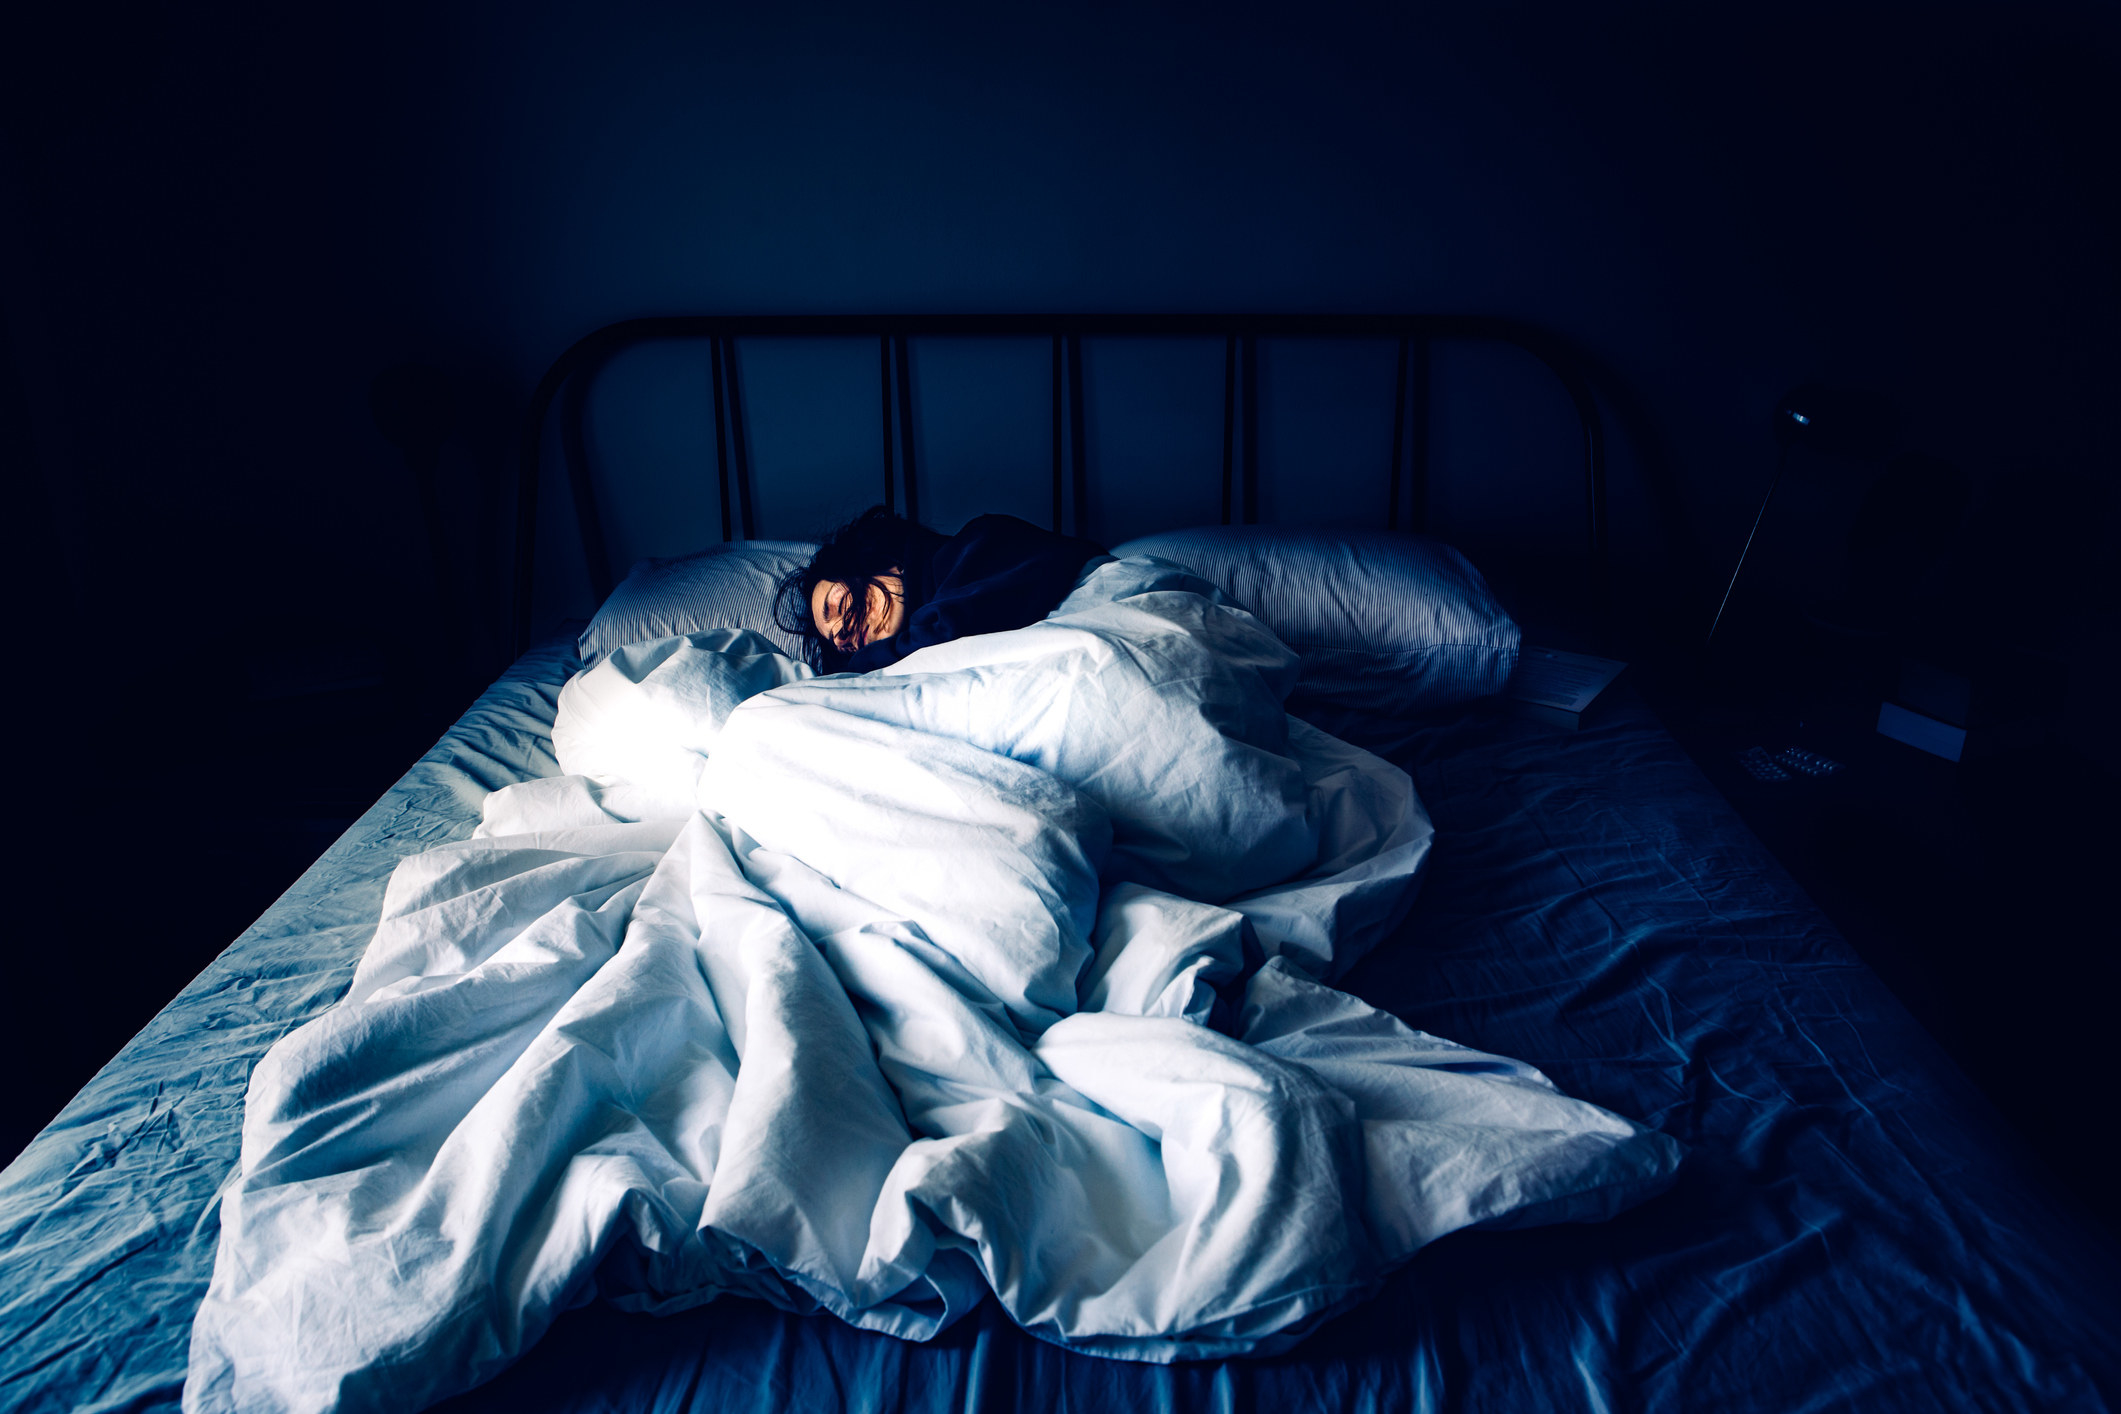 A person sleeps in bed under a large comforter